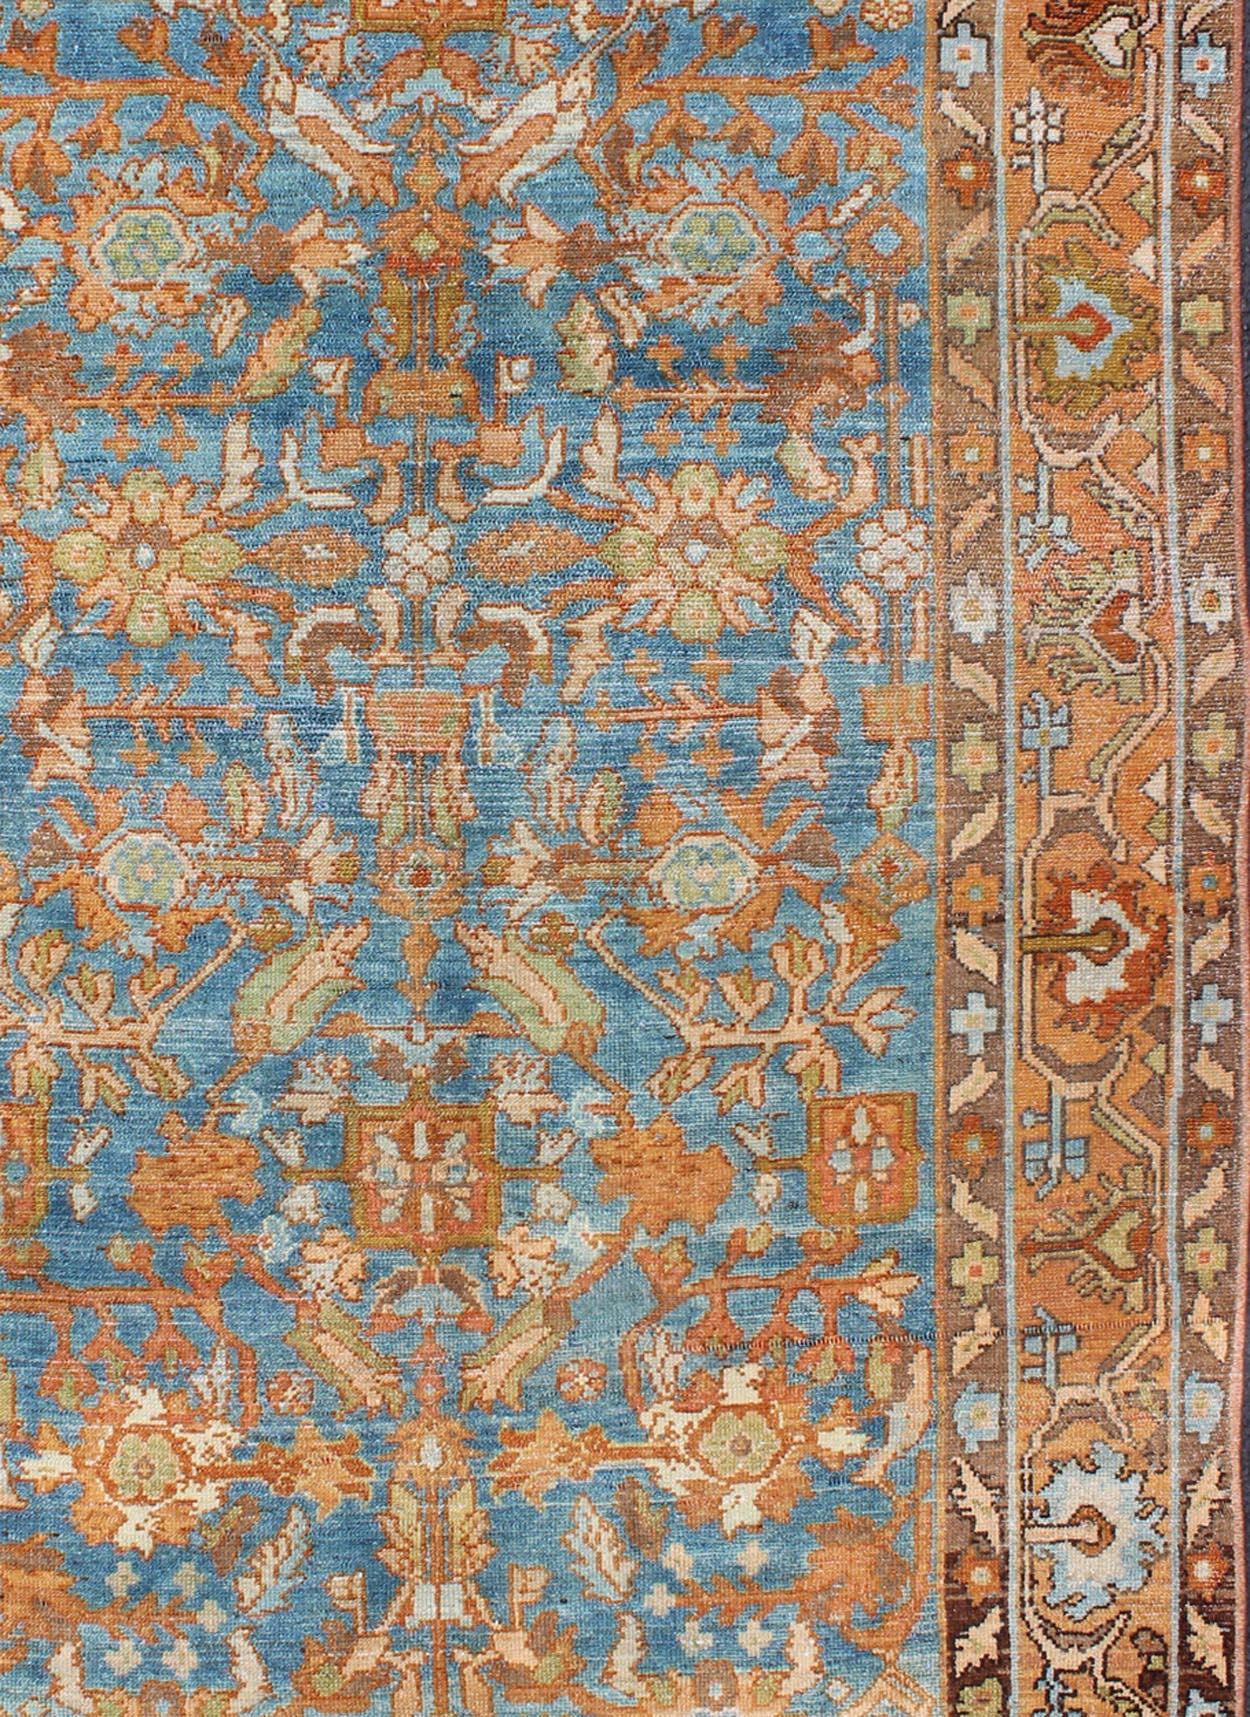 Vibrant Antique Persian Malayer Rug in Shades of Rust, Orange, and Blue In Excellent Condition For Sale In Atlanta, GA